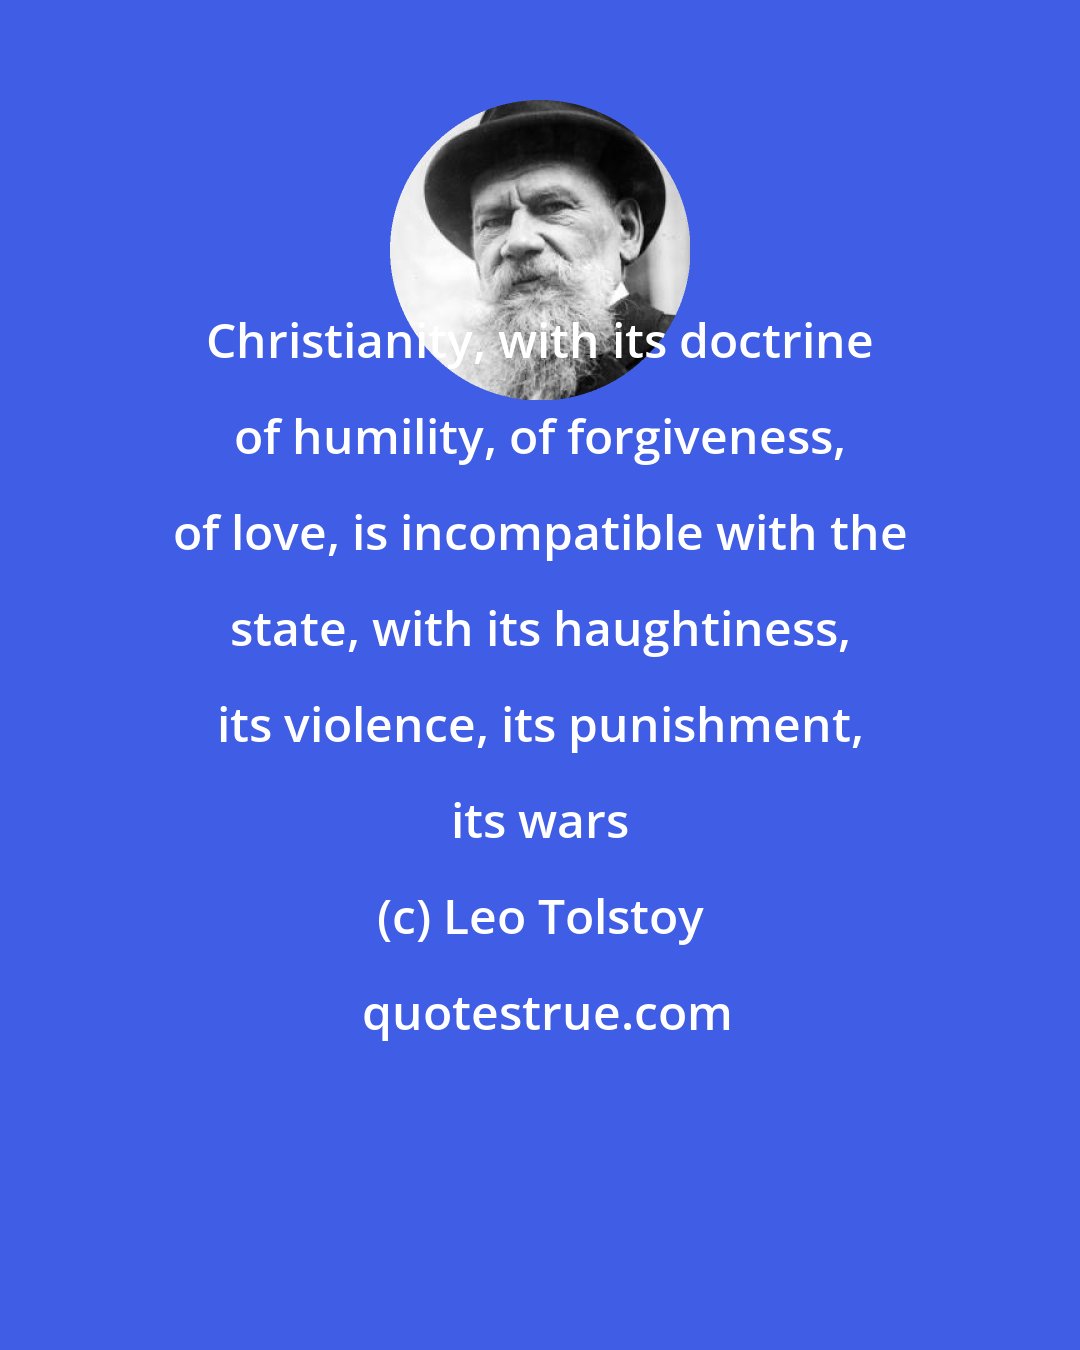 Leo Tolstoy: Christianity, with its doctrine of humility, of forgiveness, of love, is incompatible with the state, with its haughtiness, its violence, its punishment, its wars